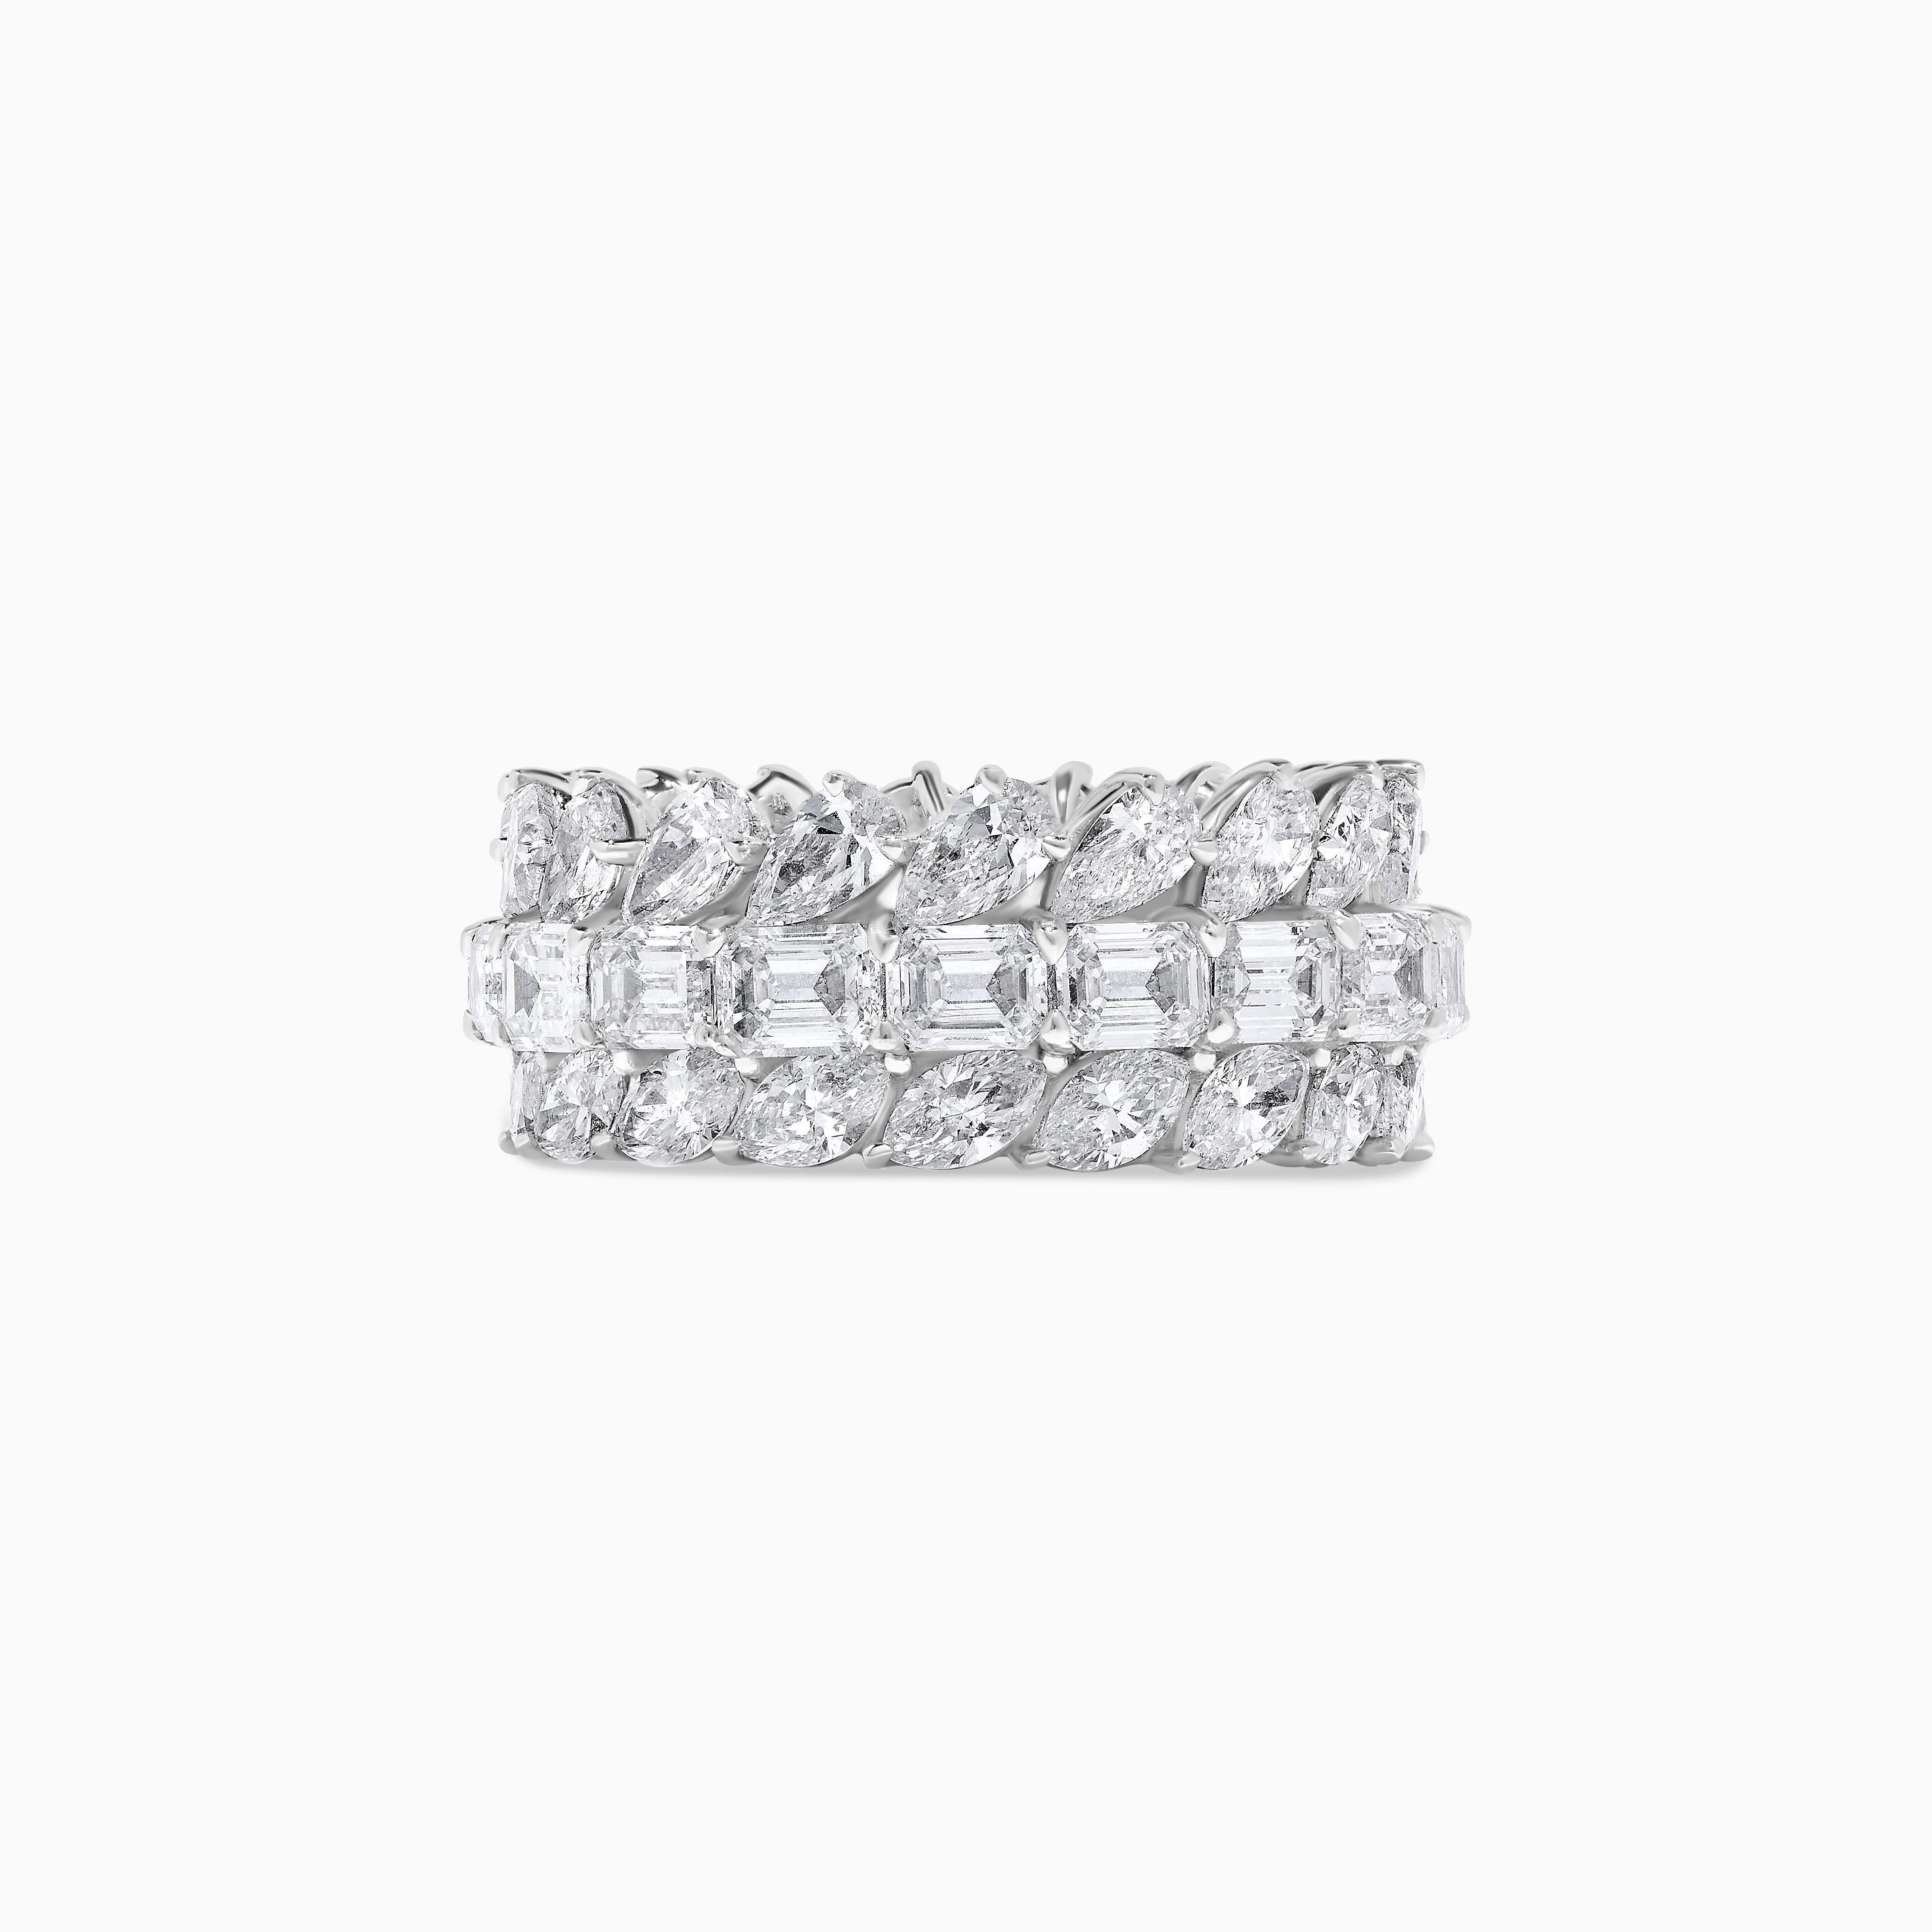 RareGemWorld's classic diamond band. Mounted in a beautiful 18K White Gold setting with natural pear cut white diamonds, natural emerald cut white diamonds, and natural marquise cut white diamonds. This ring is guaranteed to impress and enhance your